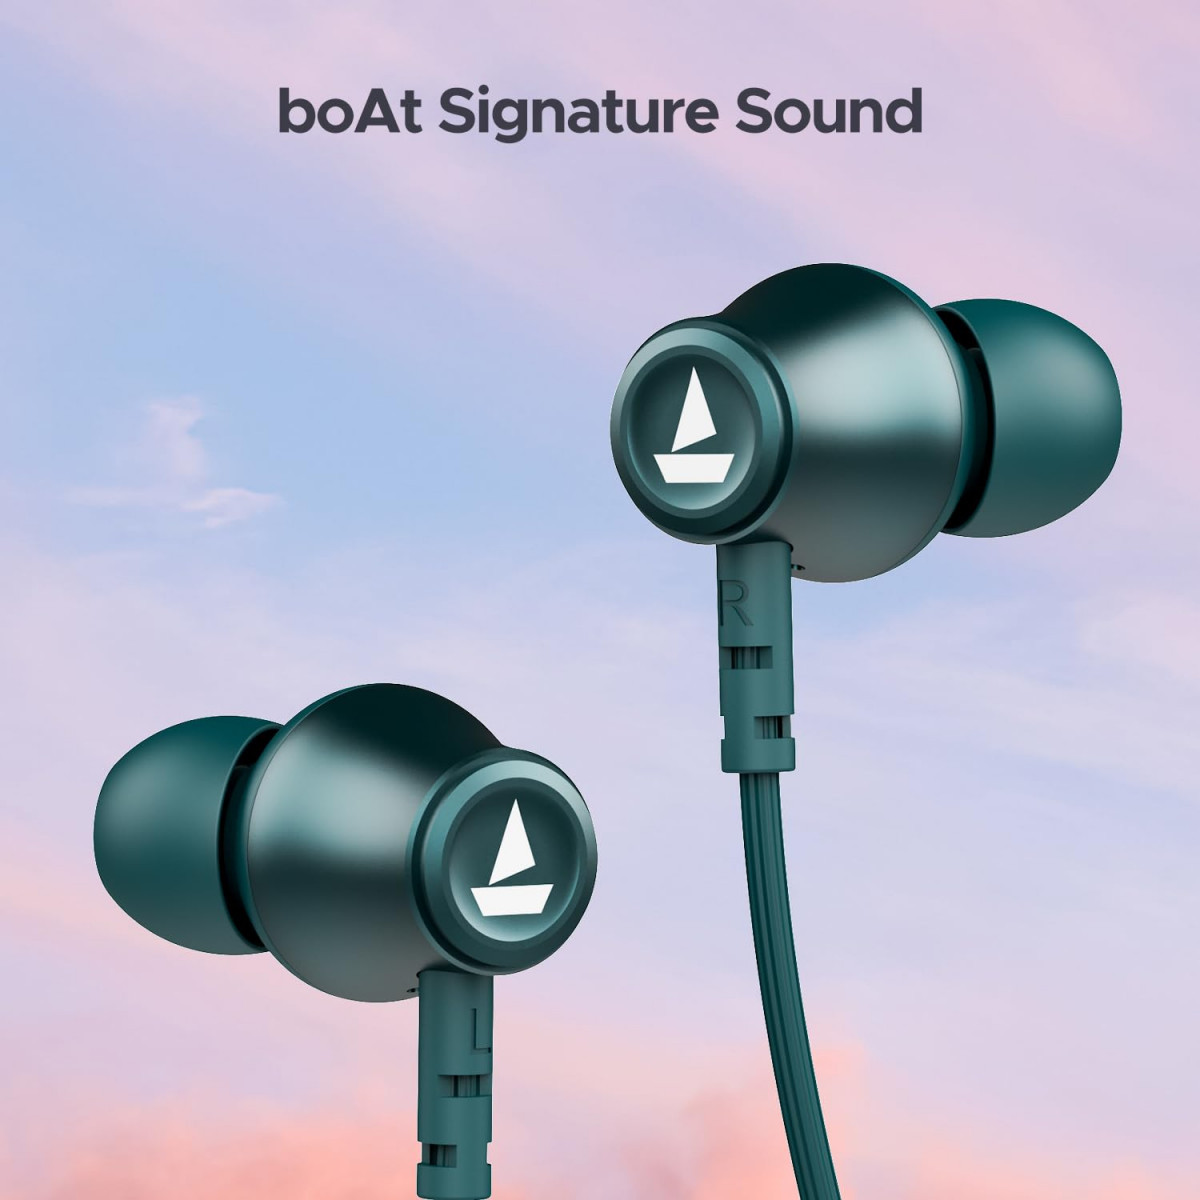 boAt Rockerz 245 V2 Pro Wireless in Ear Neckband with Up to 30 Hrs Playtime Enx Tech Asap Charge Beast Mode Dual Pairing Magnetic BudsUSB Type-C InterfaceIpx5Teal Green